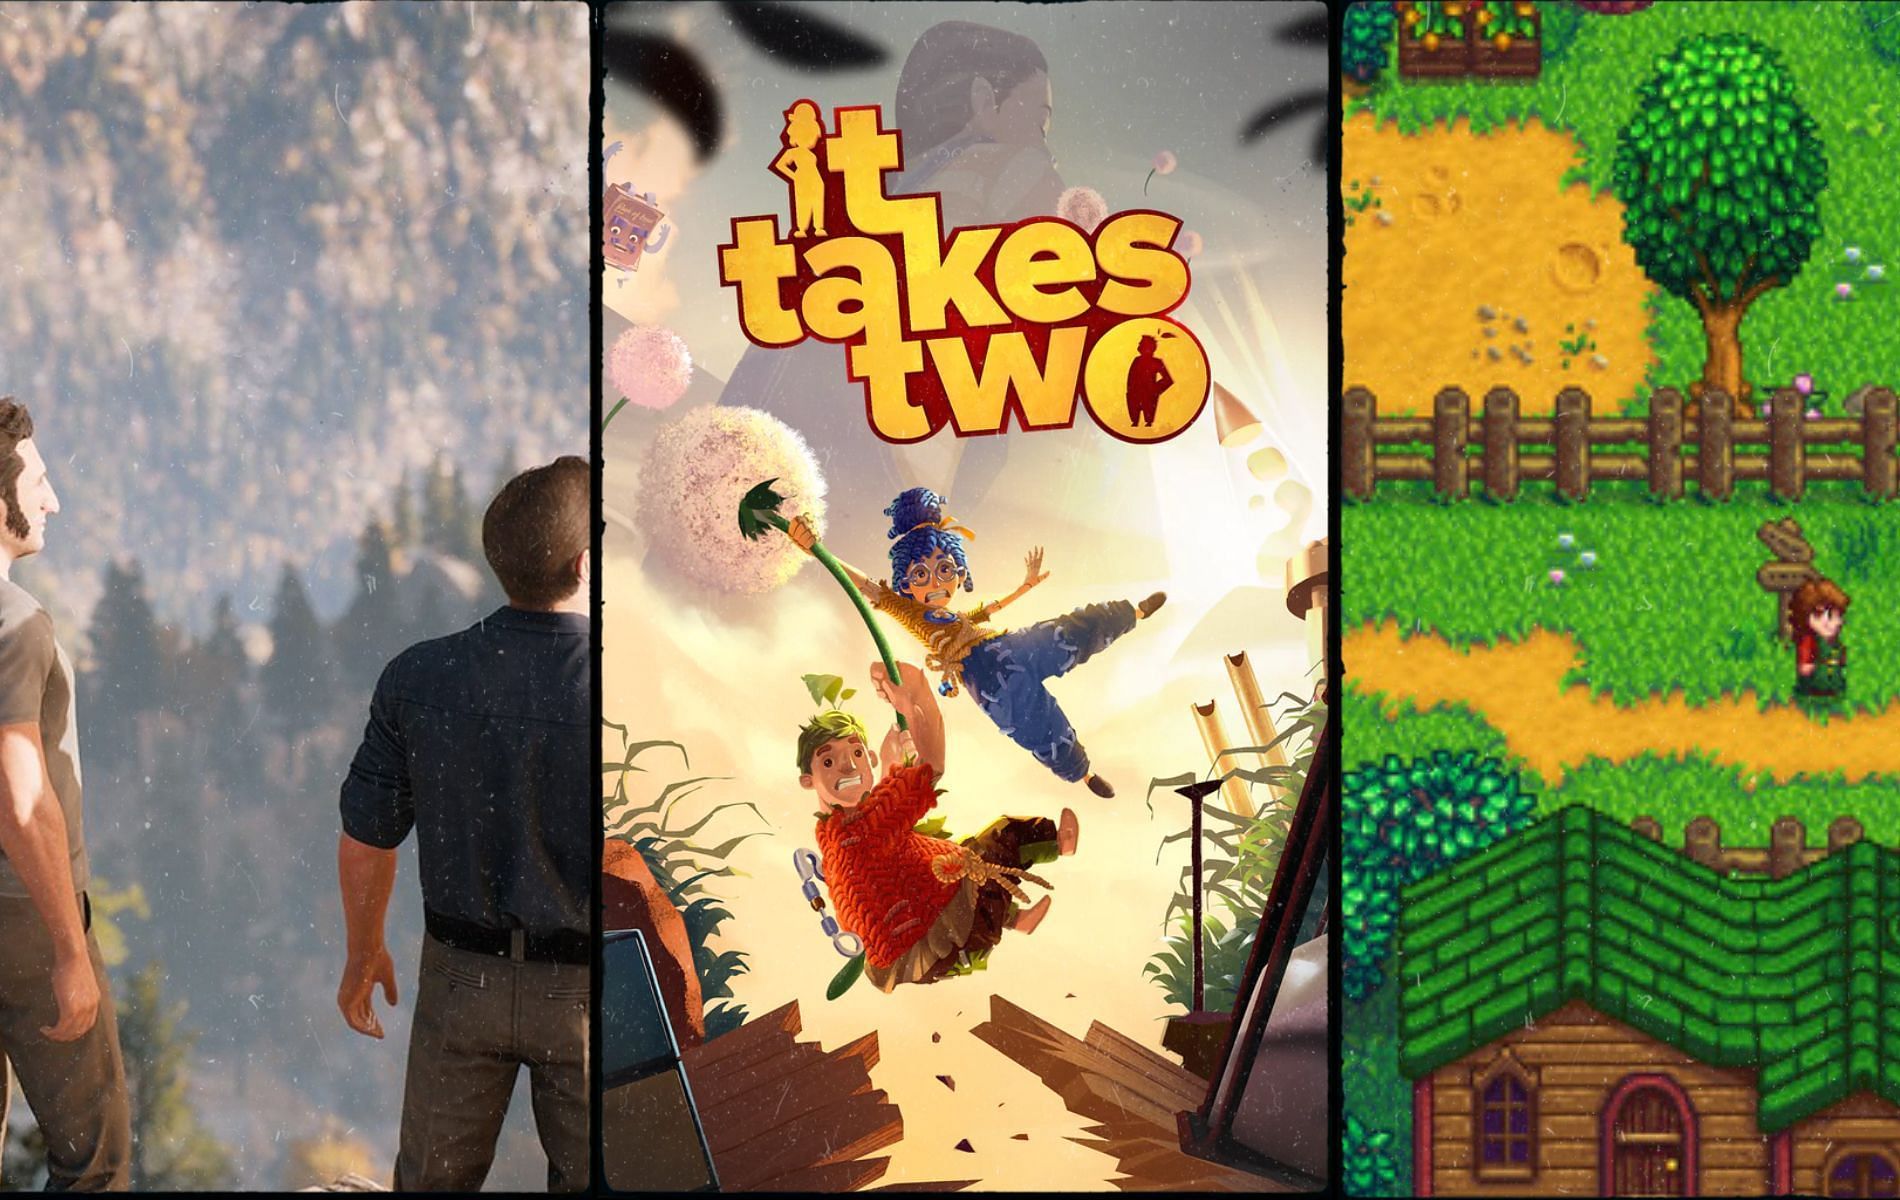 A way out, it takes two, stardew valley are among the co-op games for couples